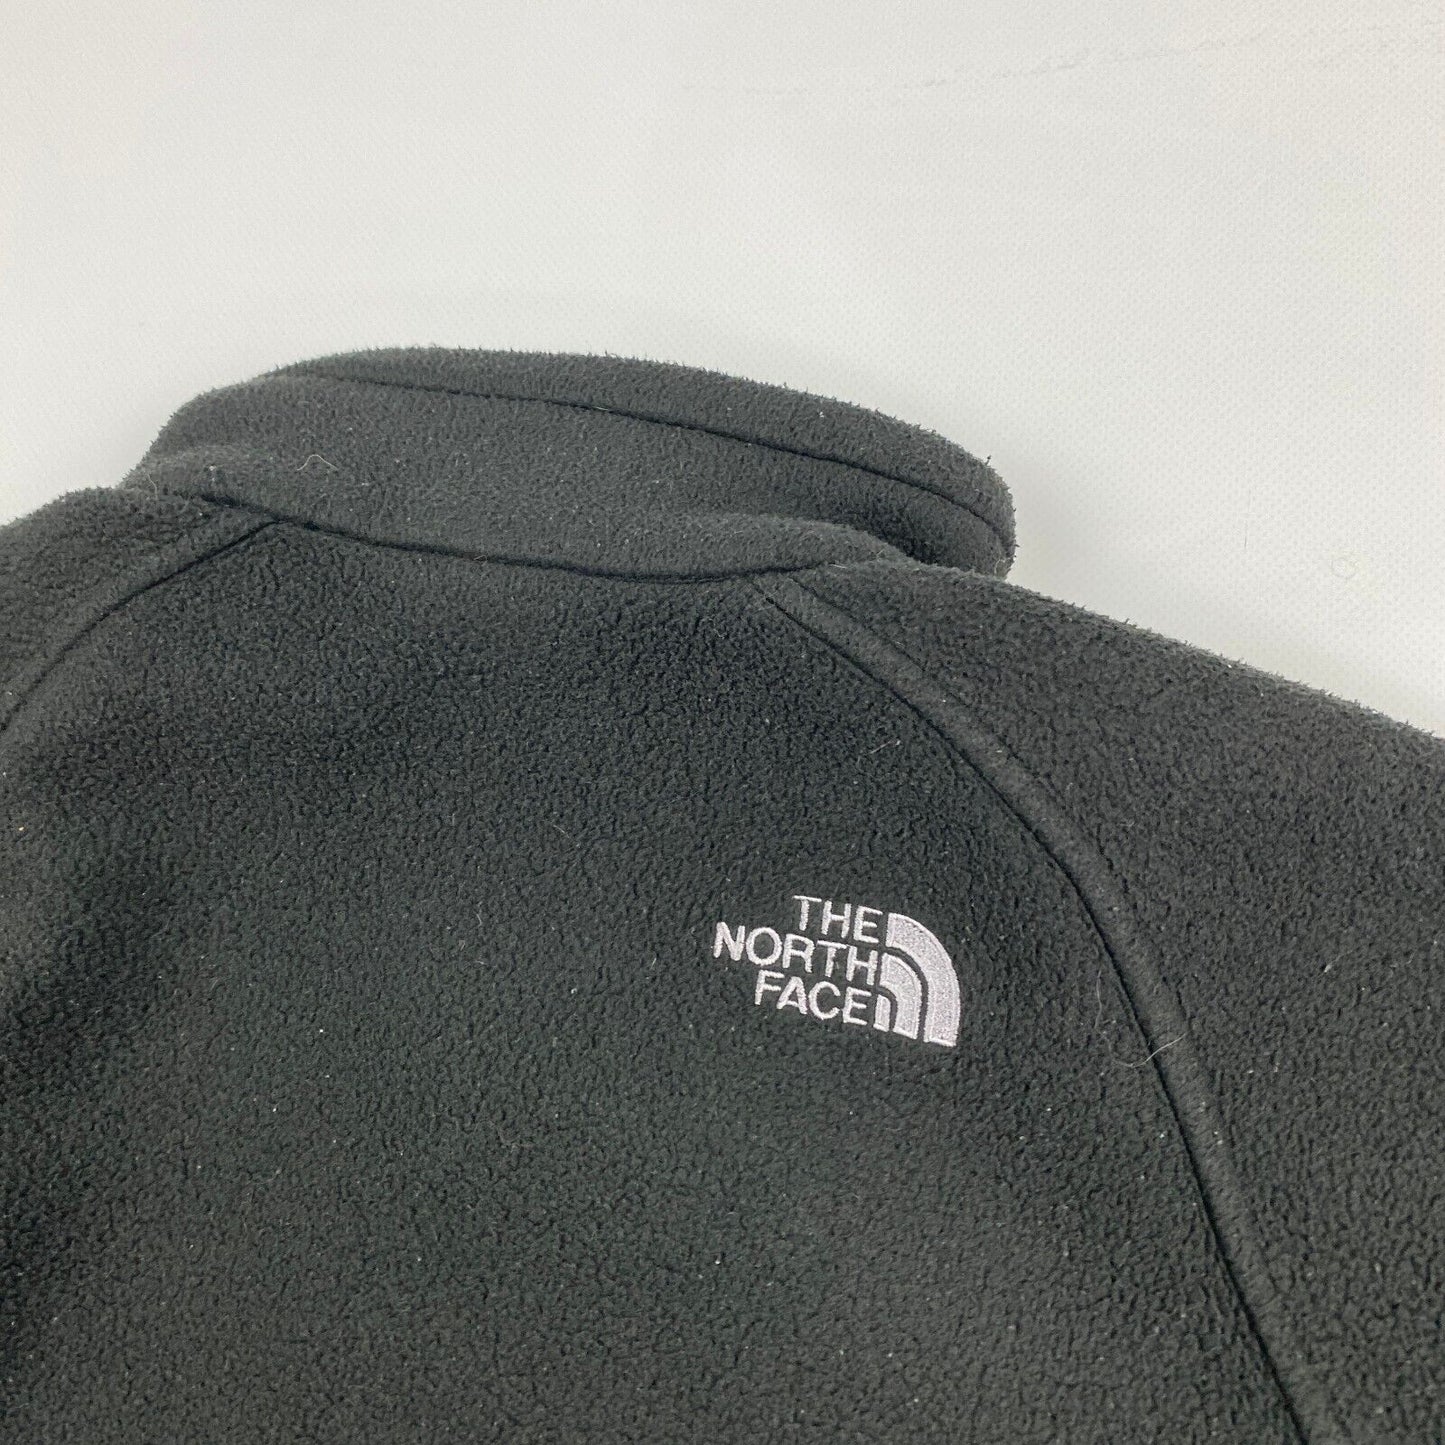 VINTAGE The North Face Black Fleece Sweater sz Small Womens